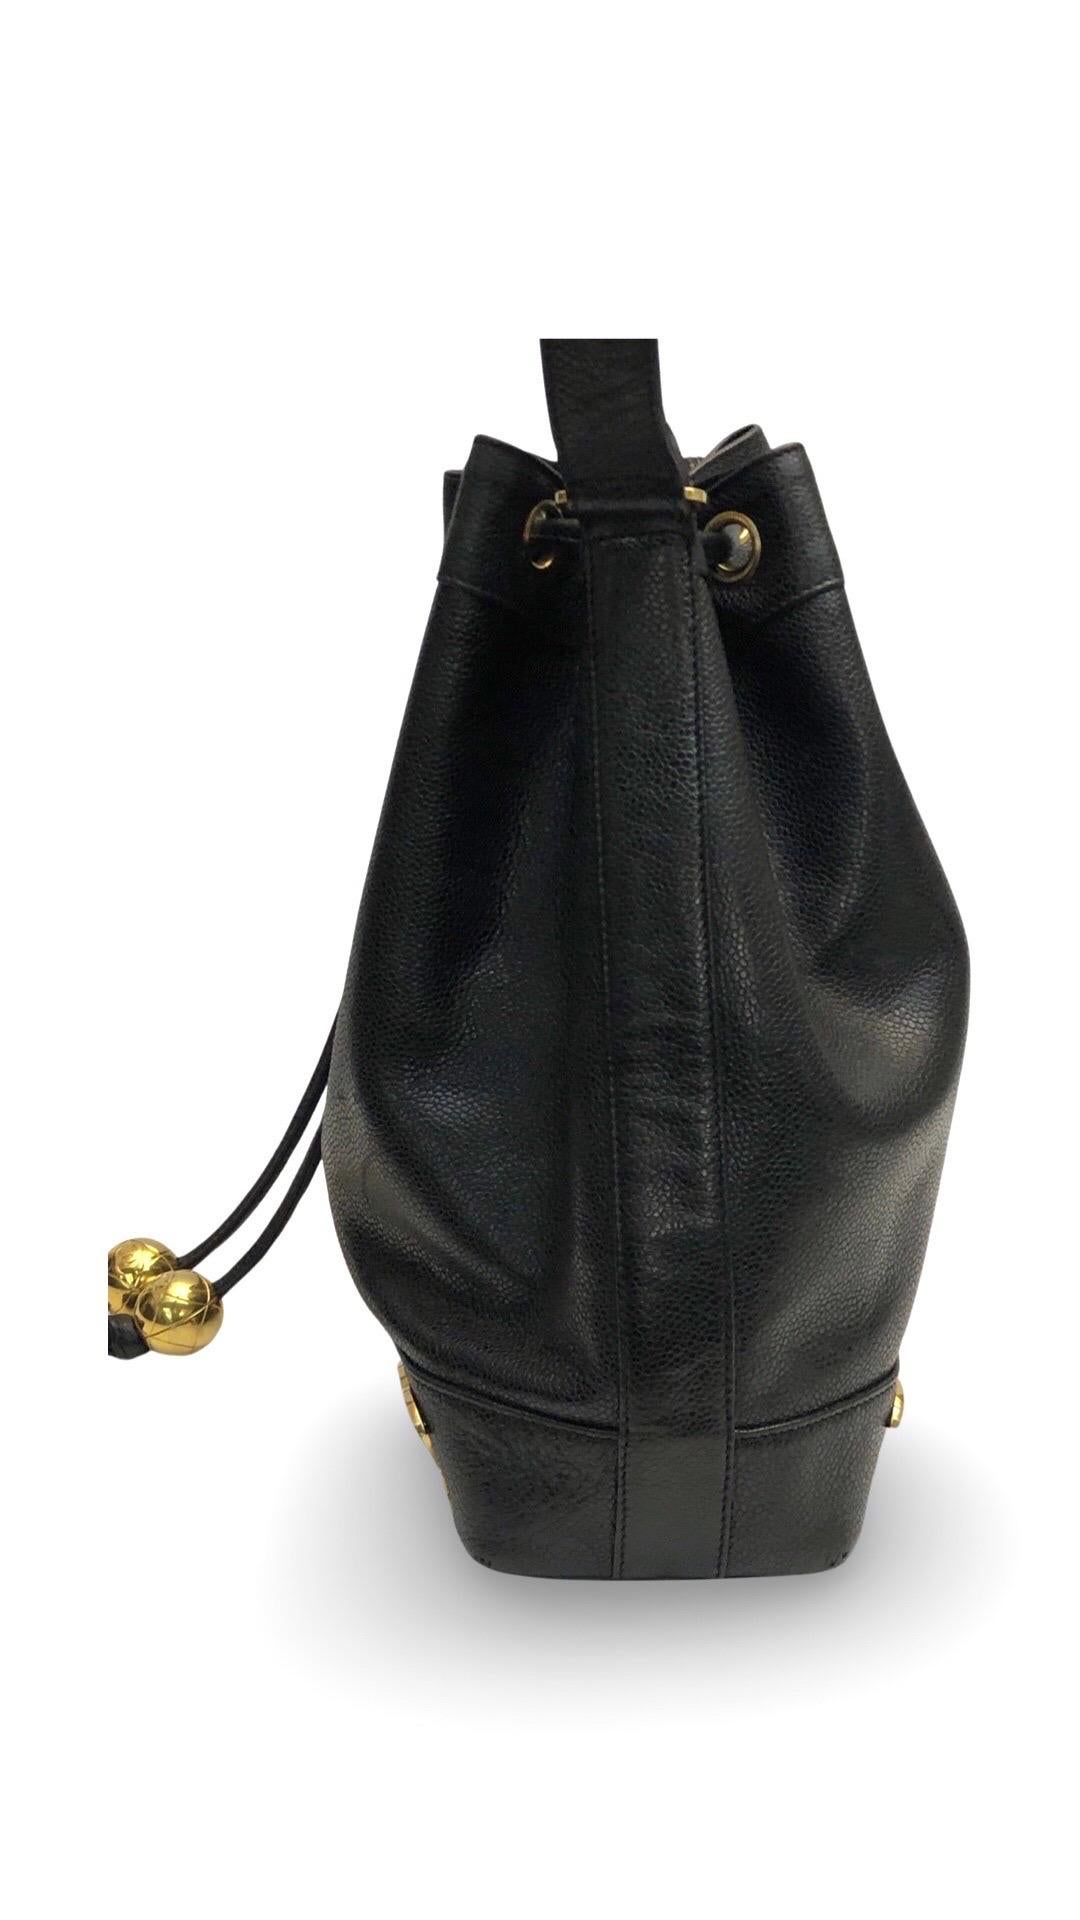 Chanel Black Caviar CC Drawstring Bucket Bag  In Excellent Condition For Sale In Sheung Wan, HK